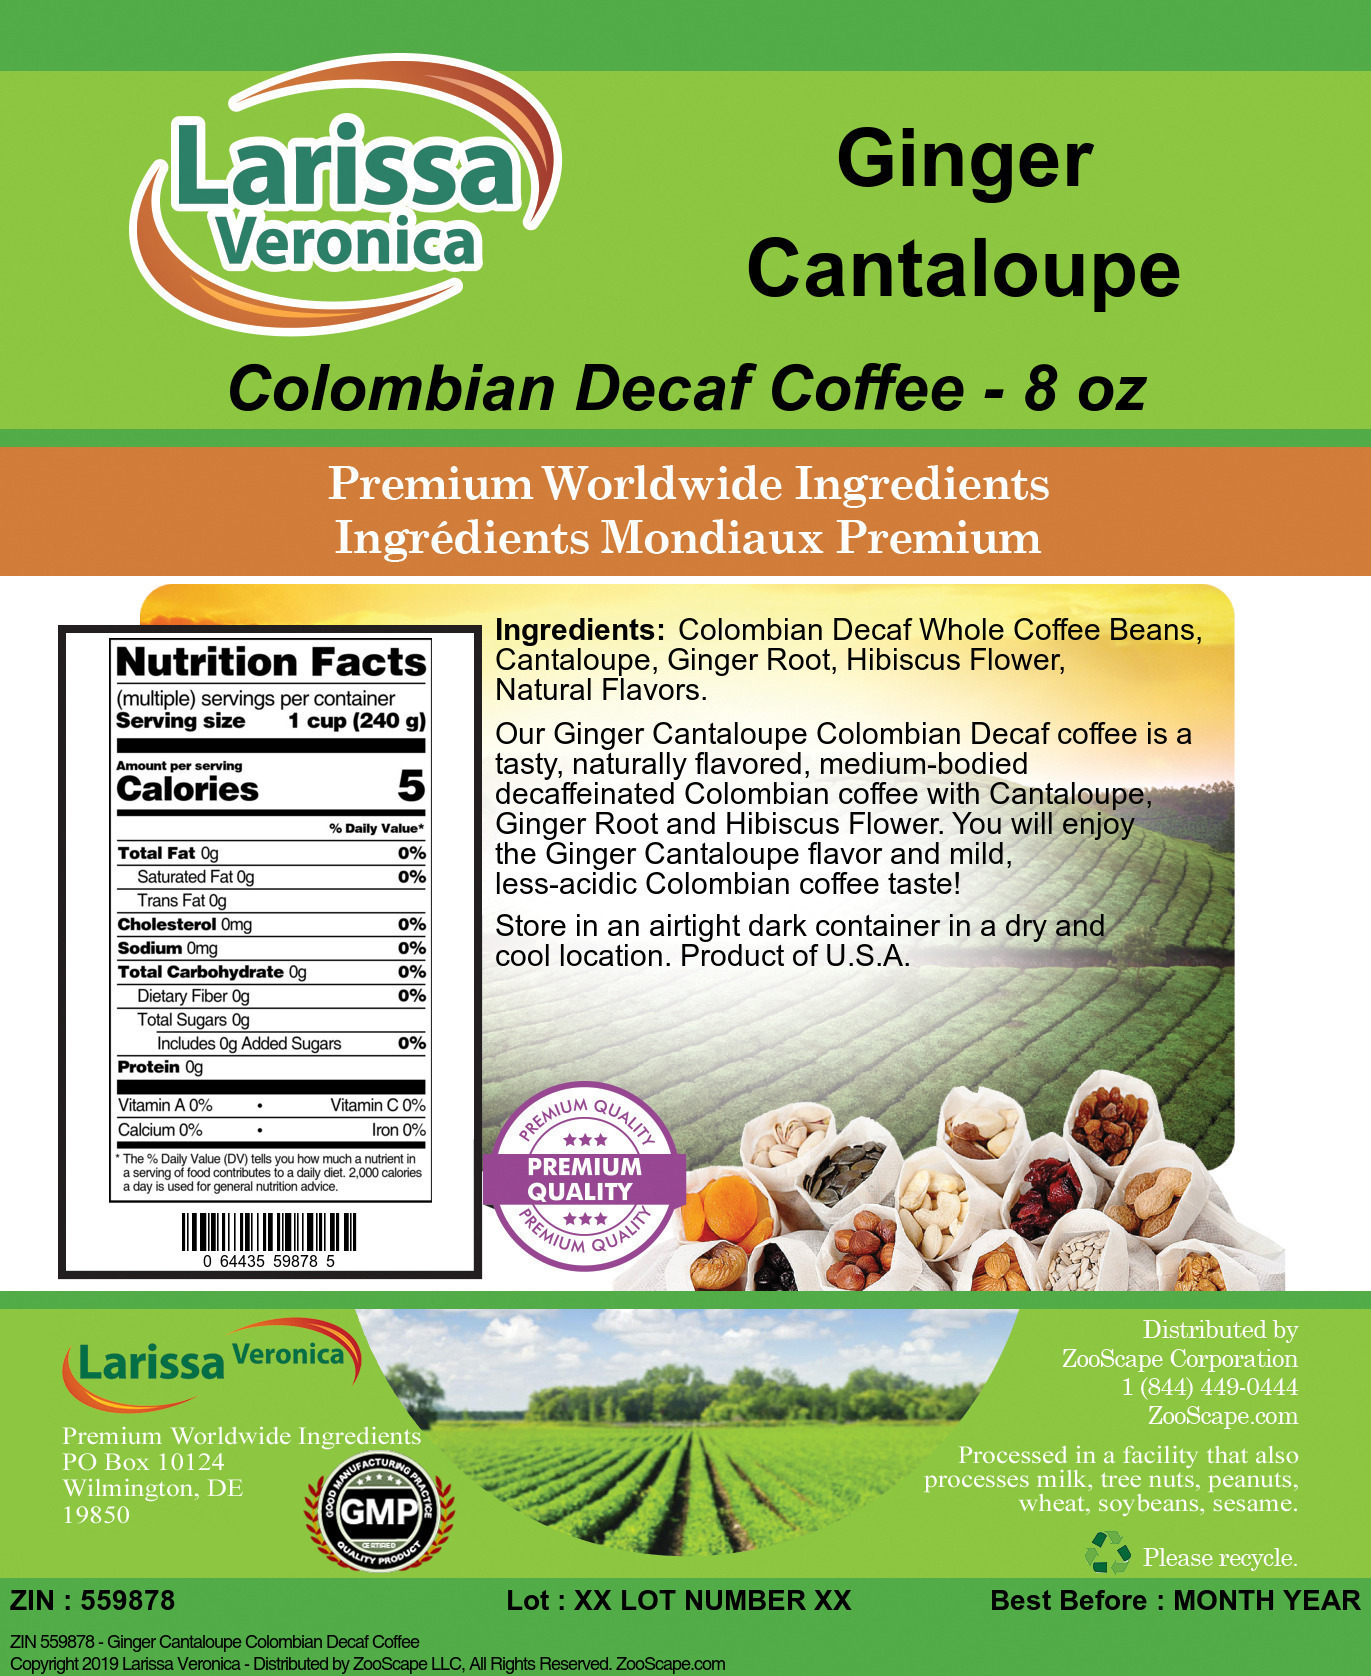 Ginger Cantaloupe Colombian Decaf Coffee - Label